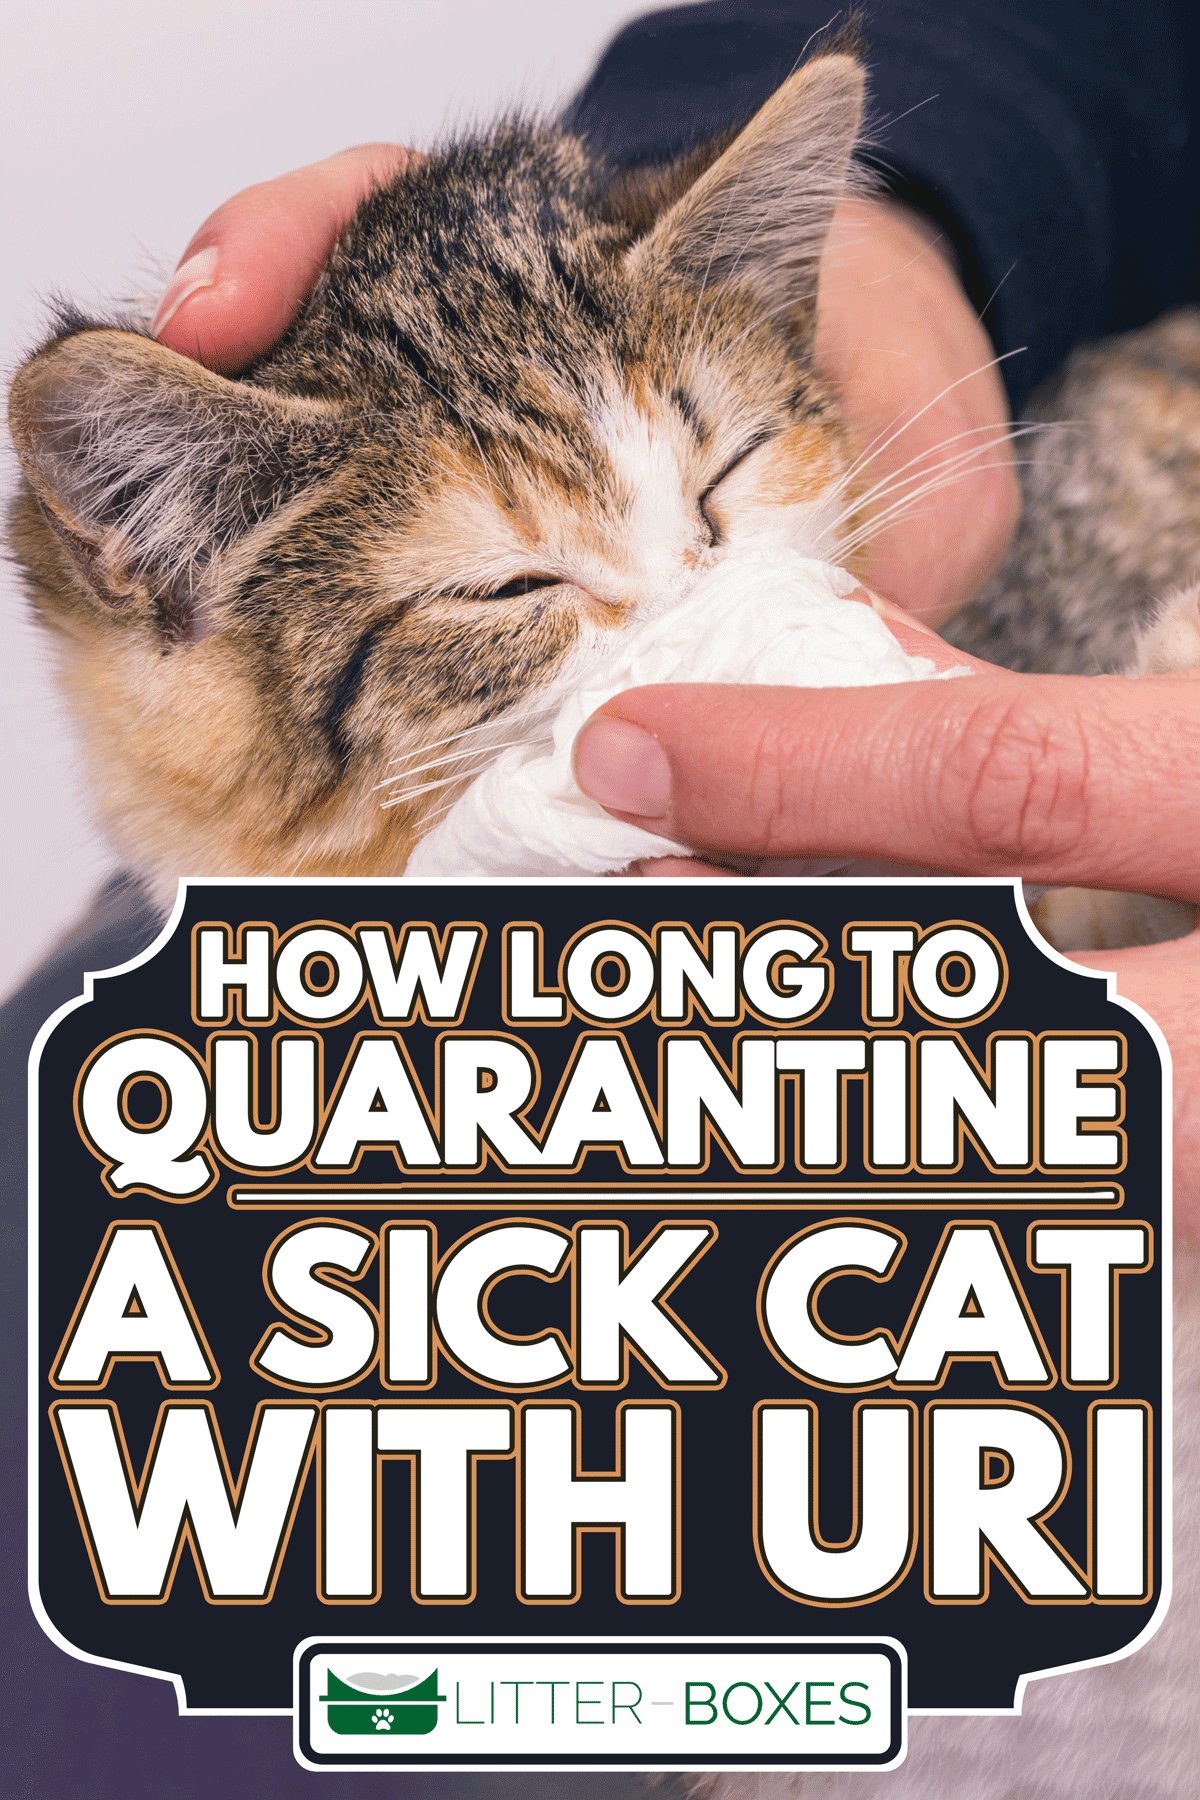 Poor sick kitten with an infection and discharge, How Long To Quarantine A Sick Cat With URI